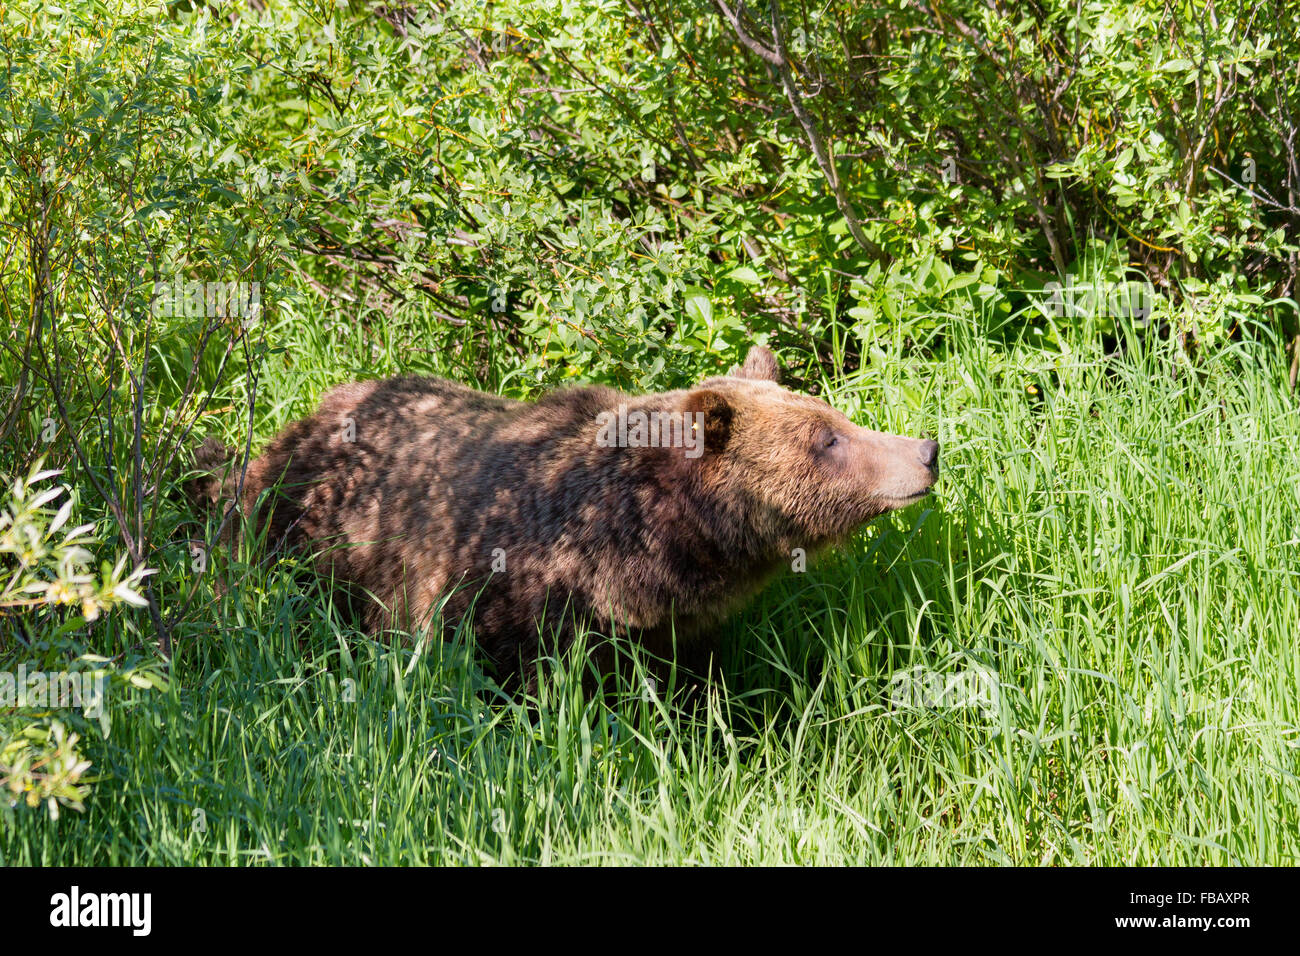 Grizzly Bear #610 smells the air at a small clearing of willow trees in Willow Flats of Grand Teton National Park, Wyoming. Stock Photo